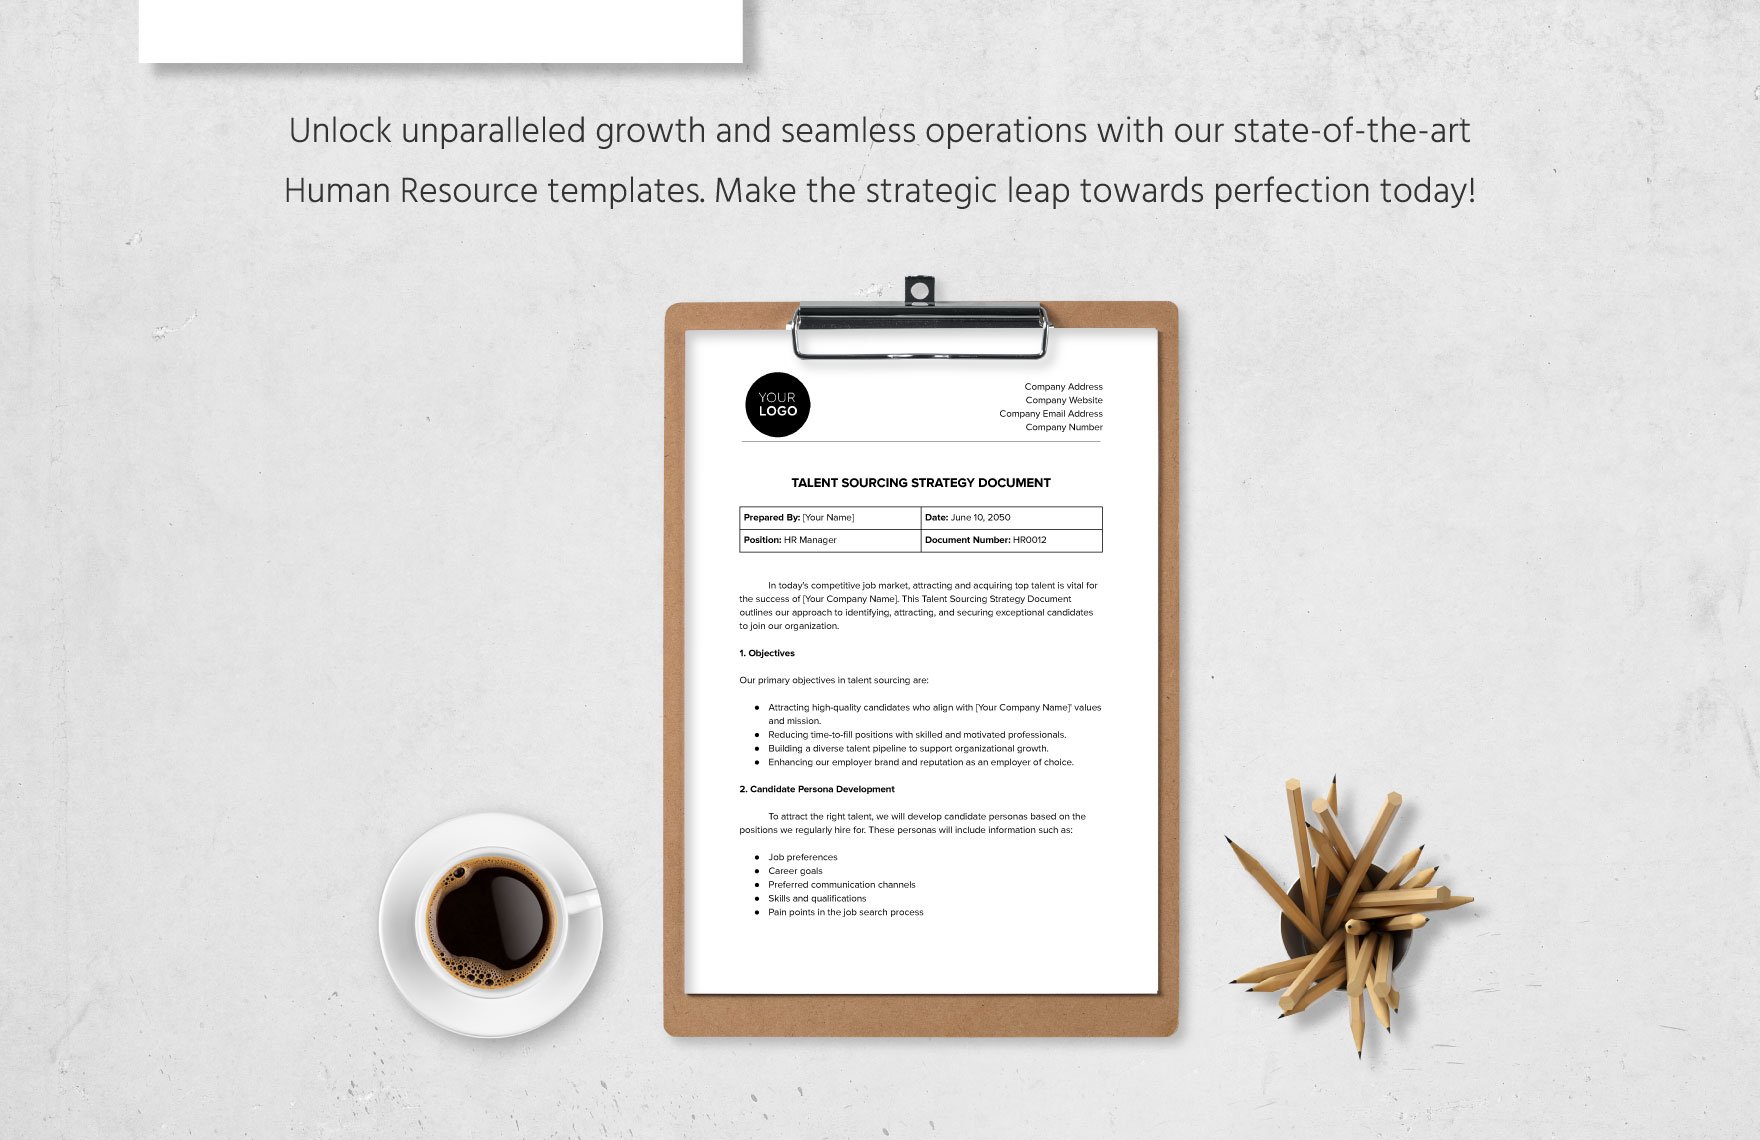 Talent Sourcing Strategy Document HR Template